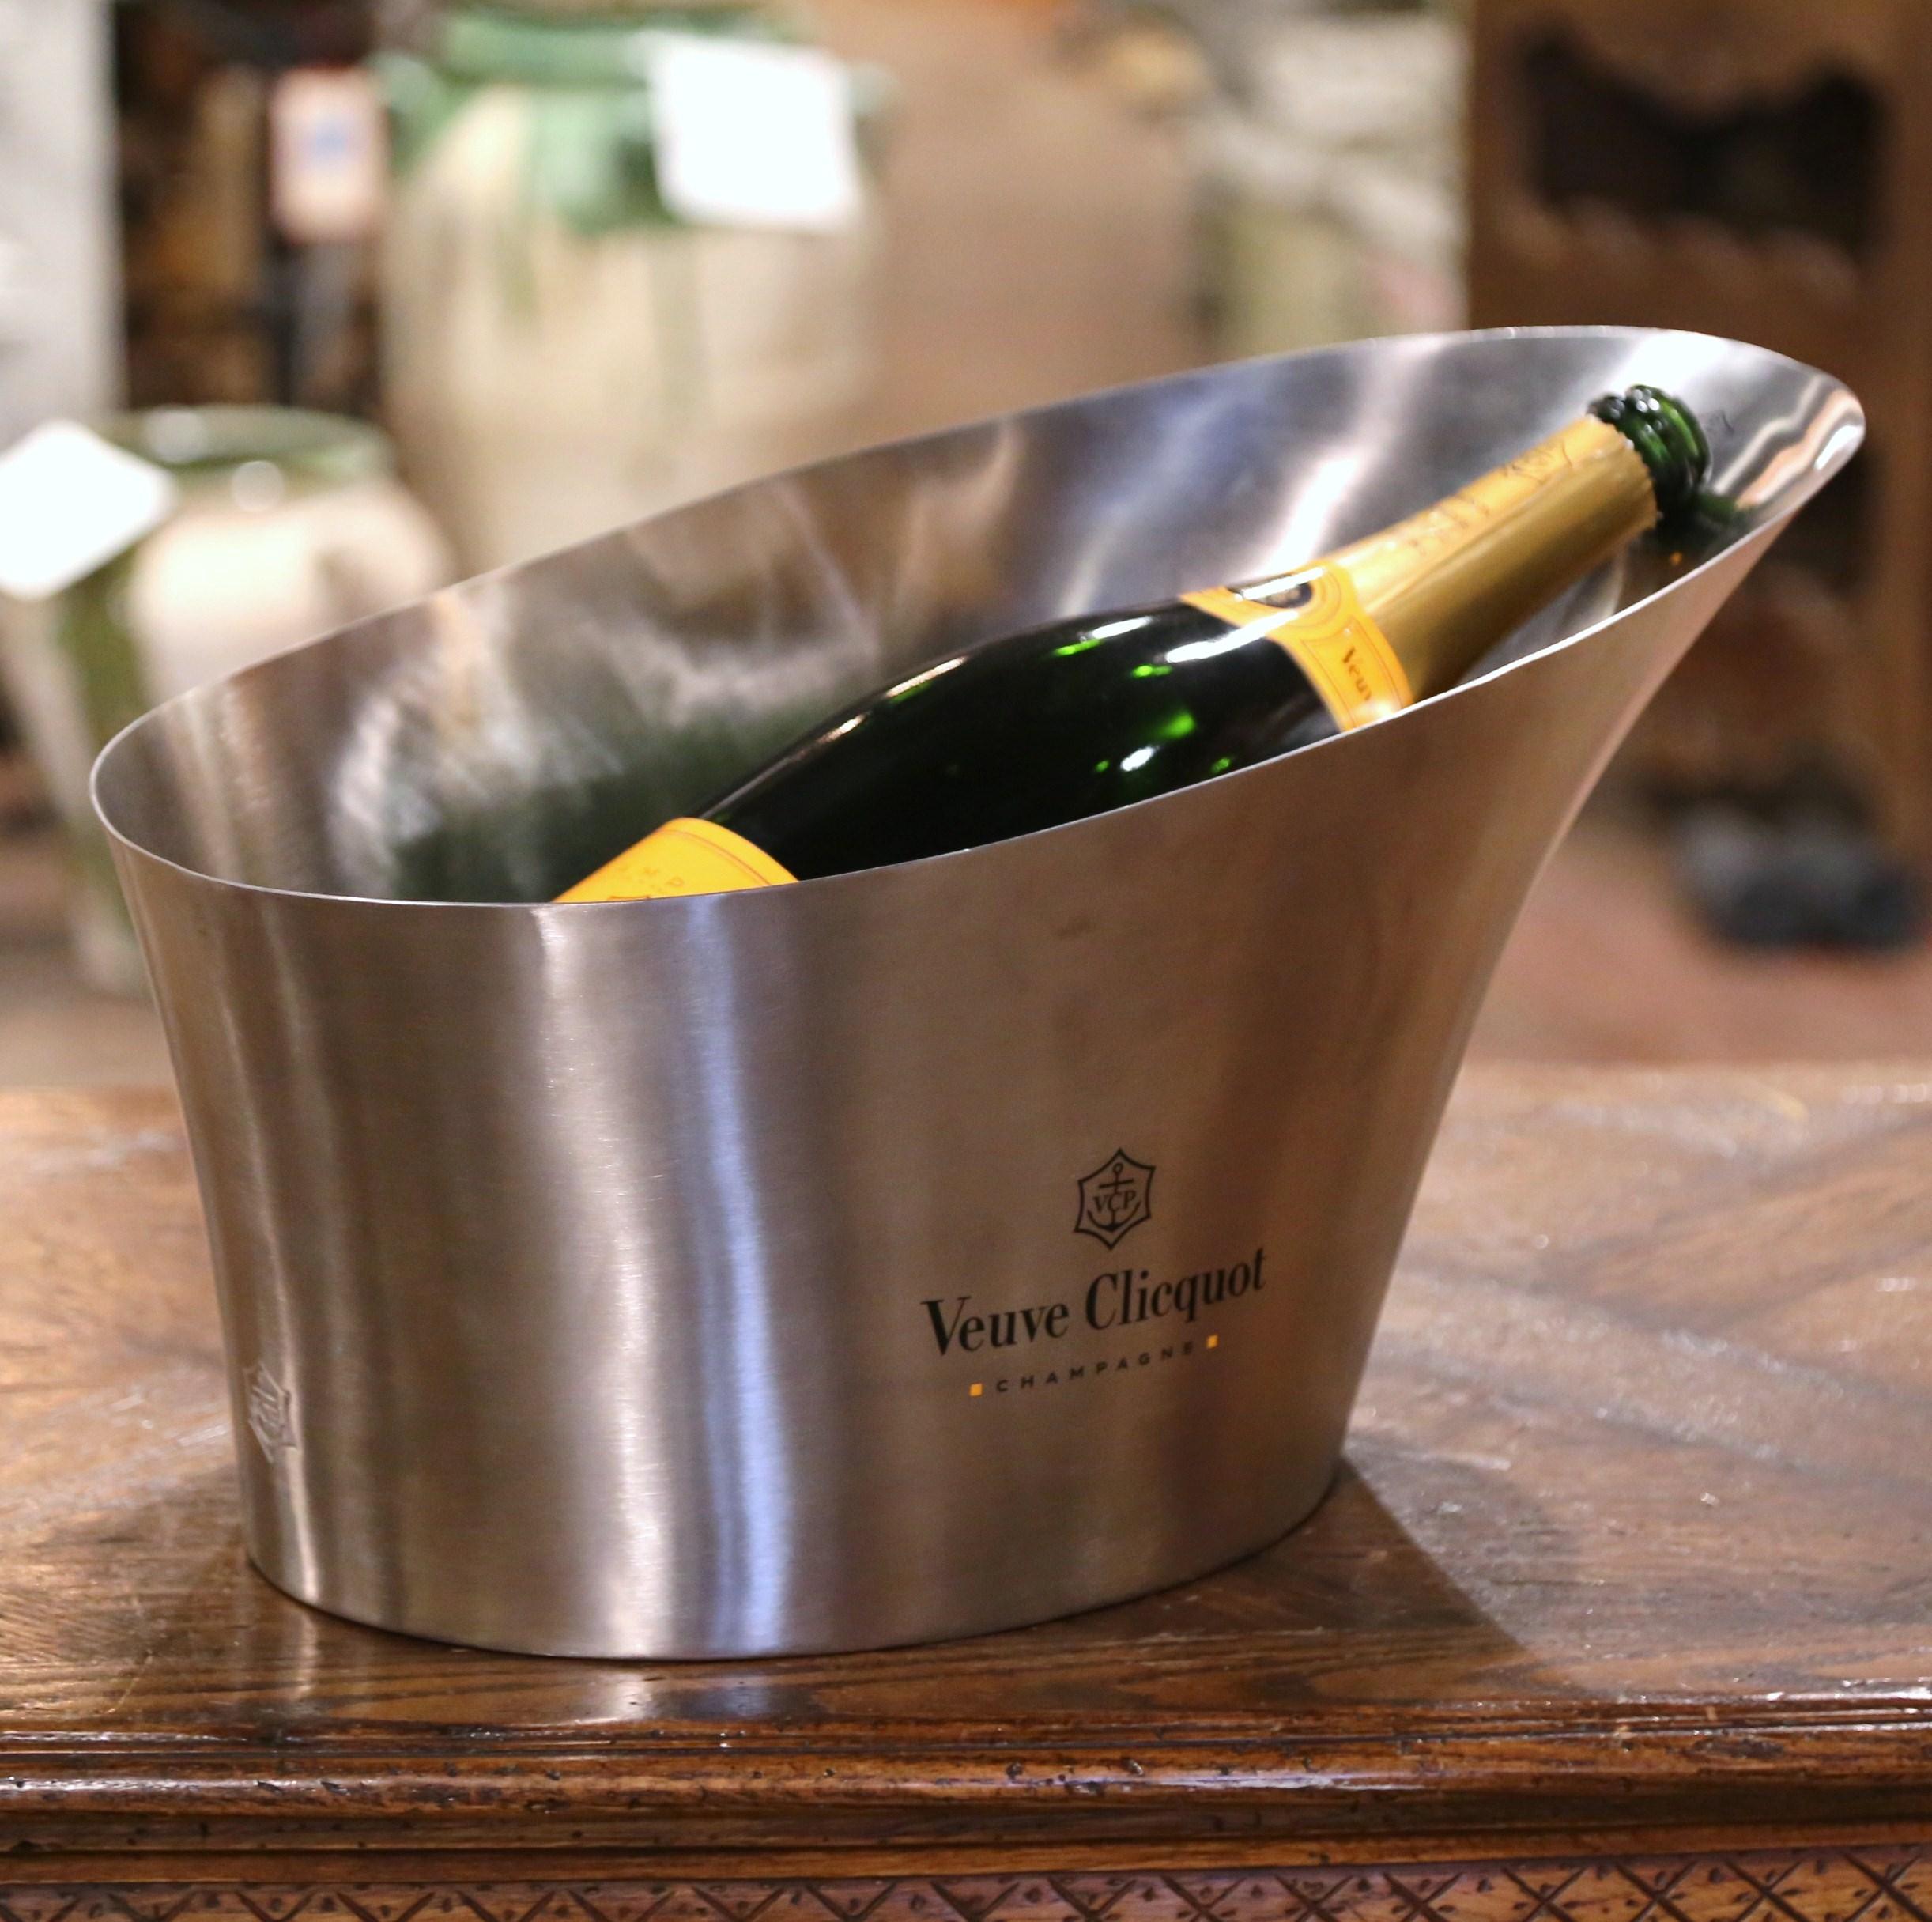 Decorate a wet bar with this elegant Jeroboam champagne cooler. Crafted in France circa 1980 and made of stainless steel, the vintage bucket was created by the iconic House of 